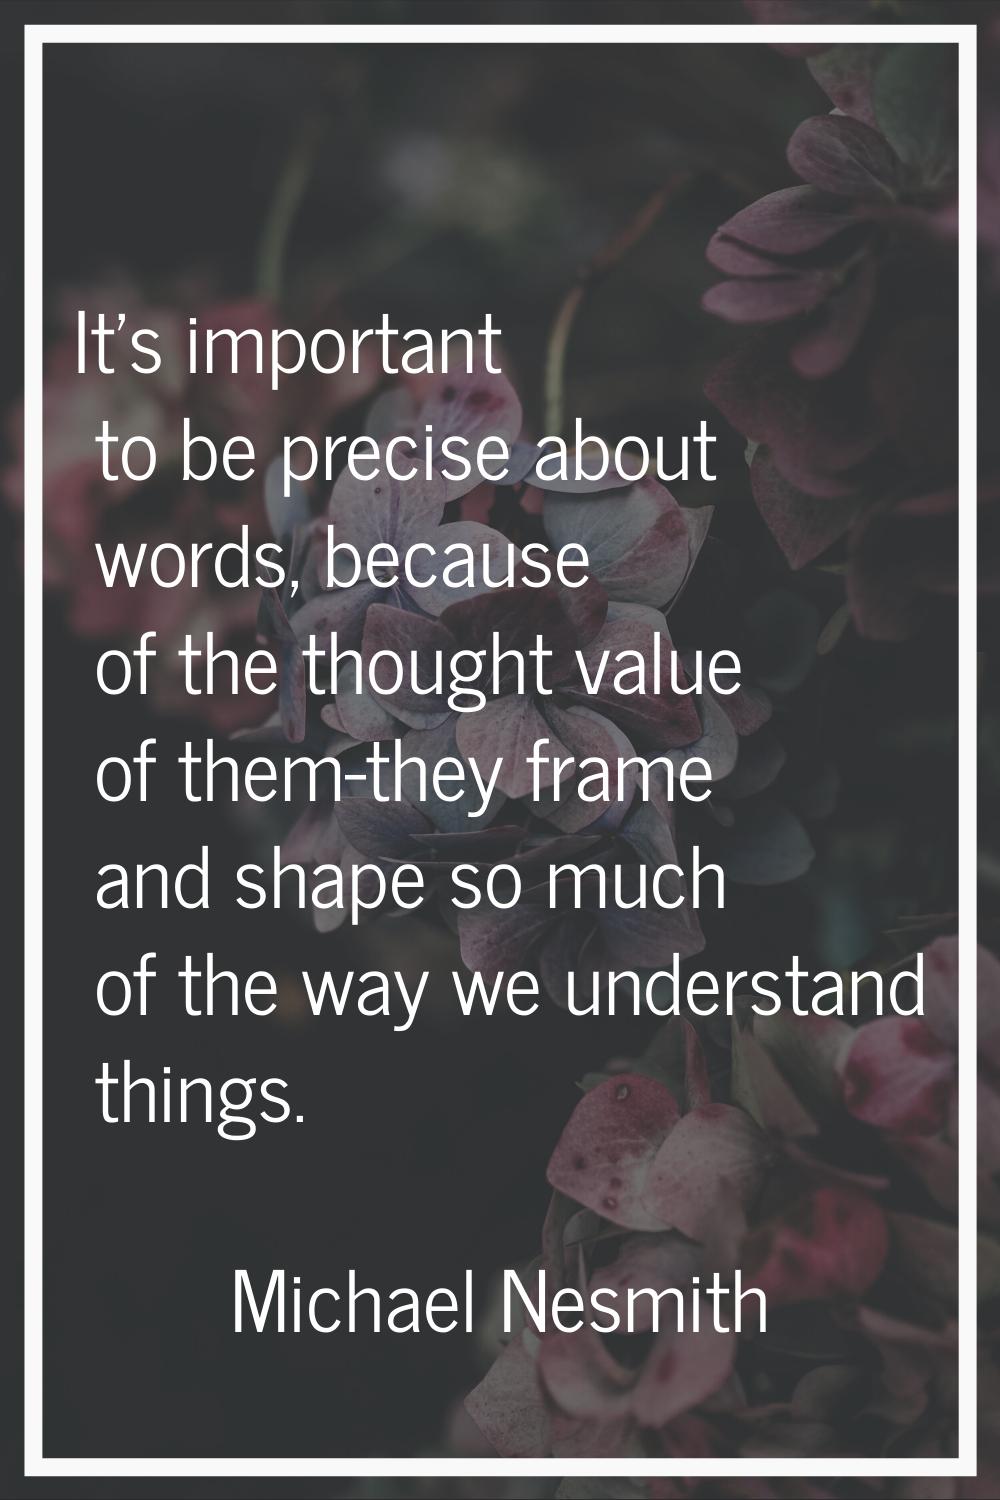 It's important to be precise about words, because of the thought value of them-they frame and shape